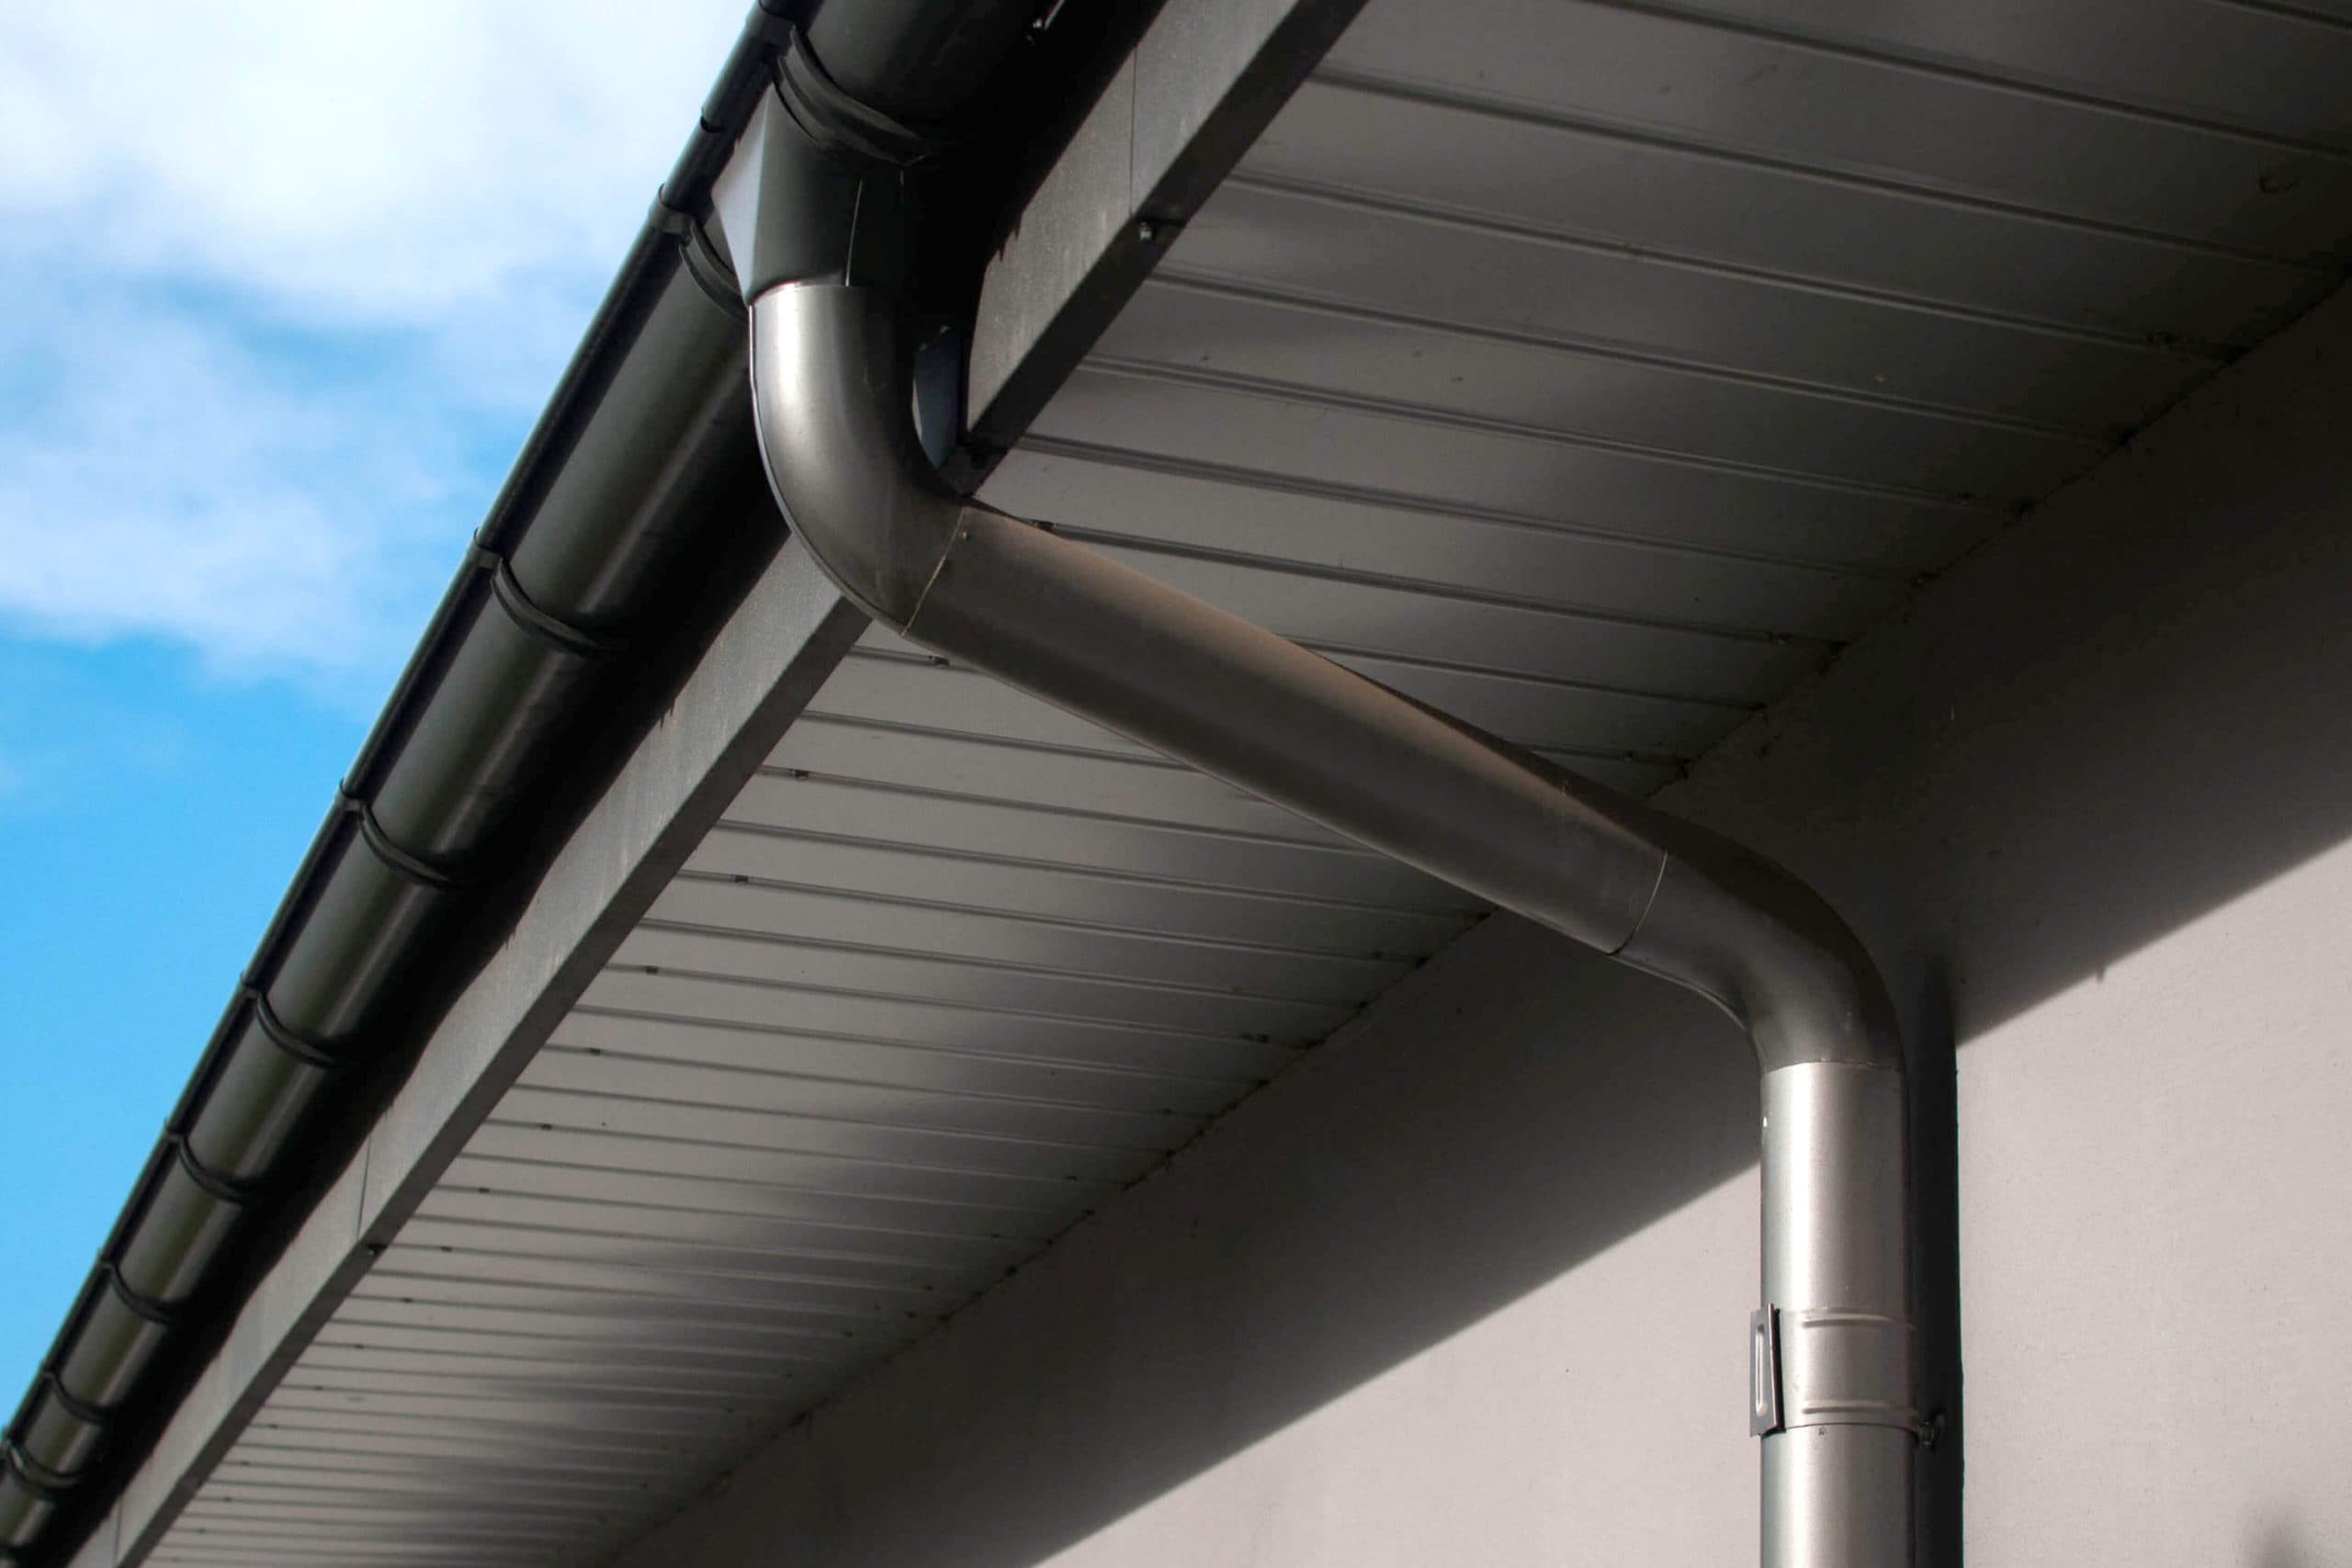 Corrosion-resistant galvanized gutters installed on a commercial building in Scranton